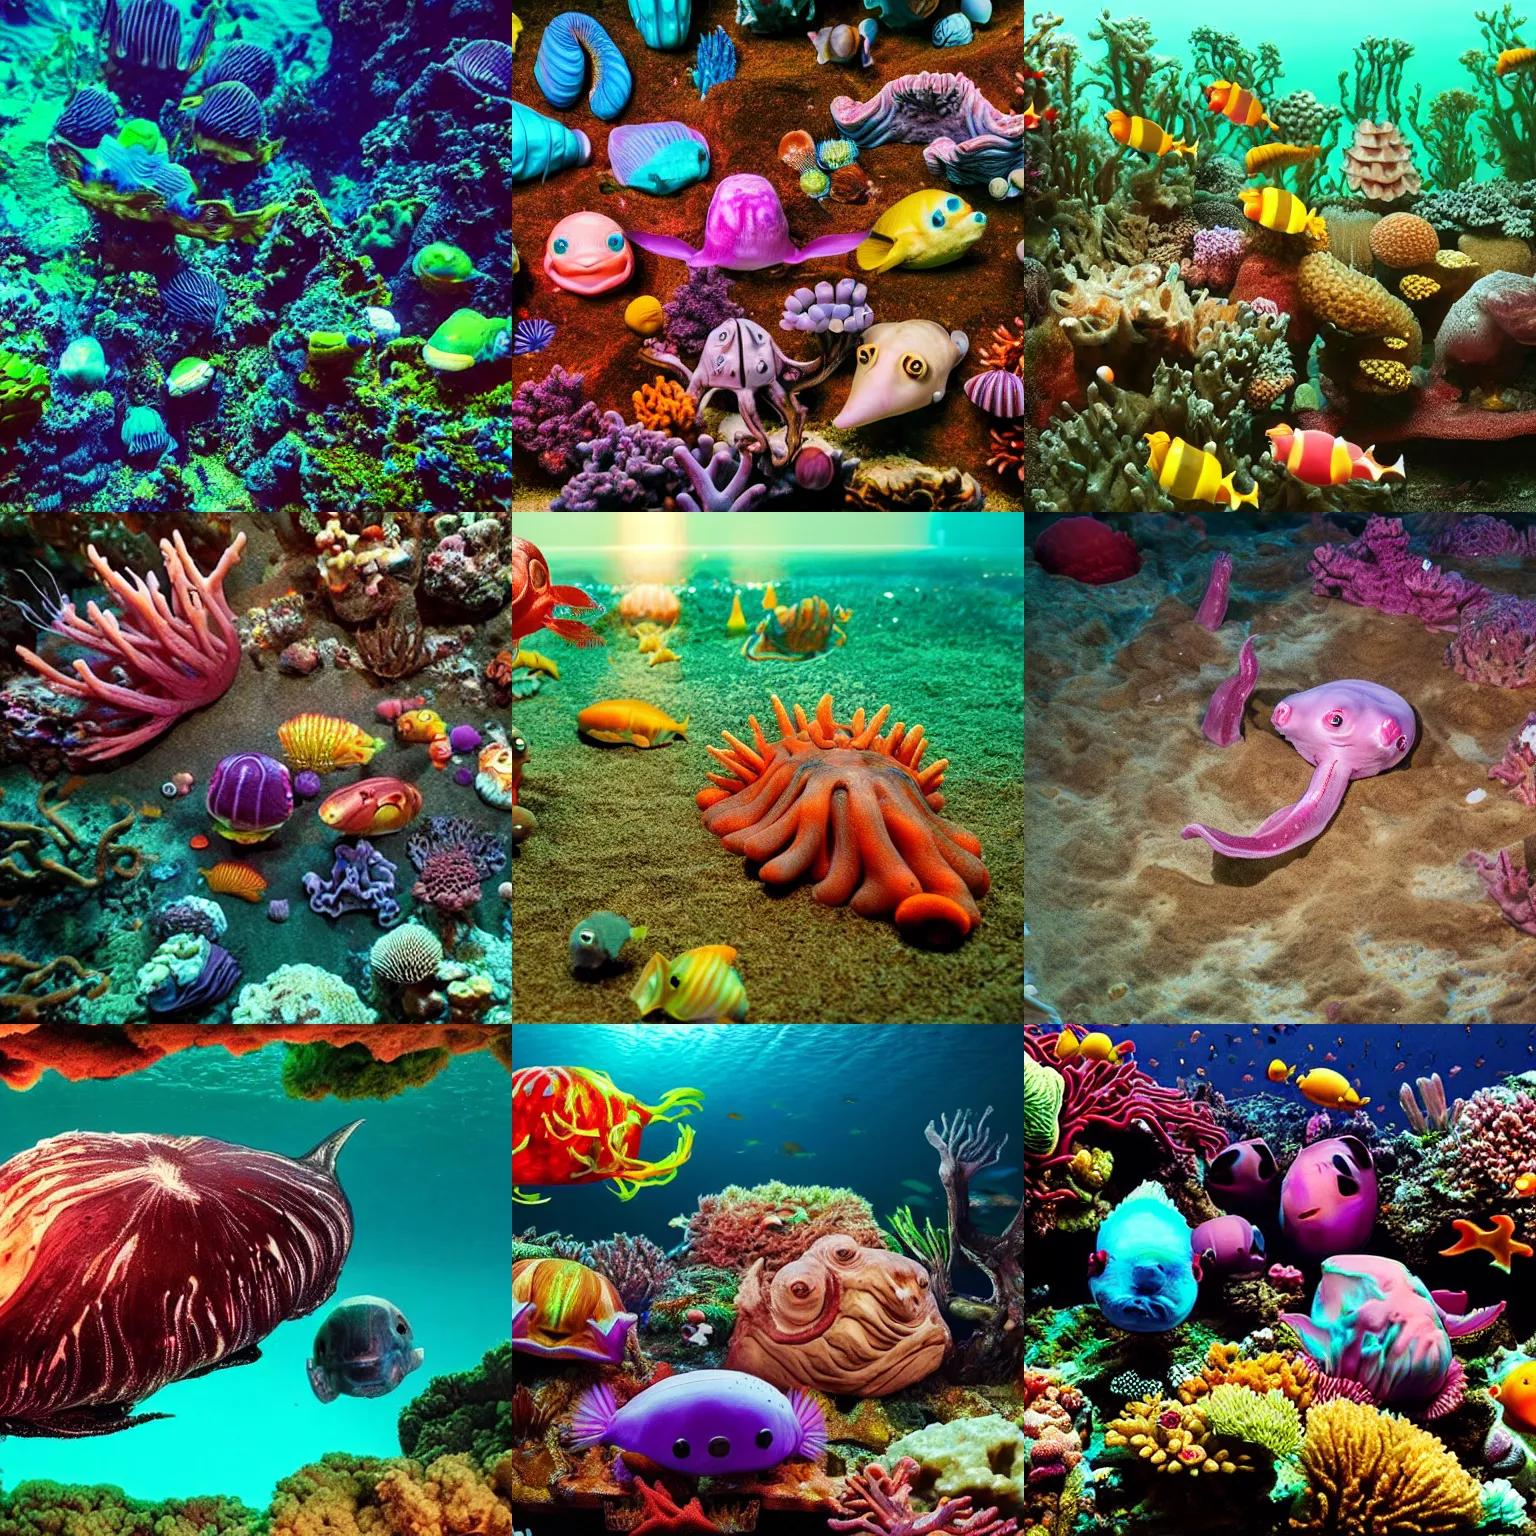 Prompt: <photo highQuality lighting=great>Incredible Deep Sea Creatures on Land</photo>